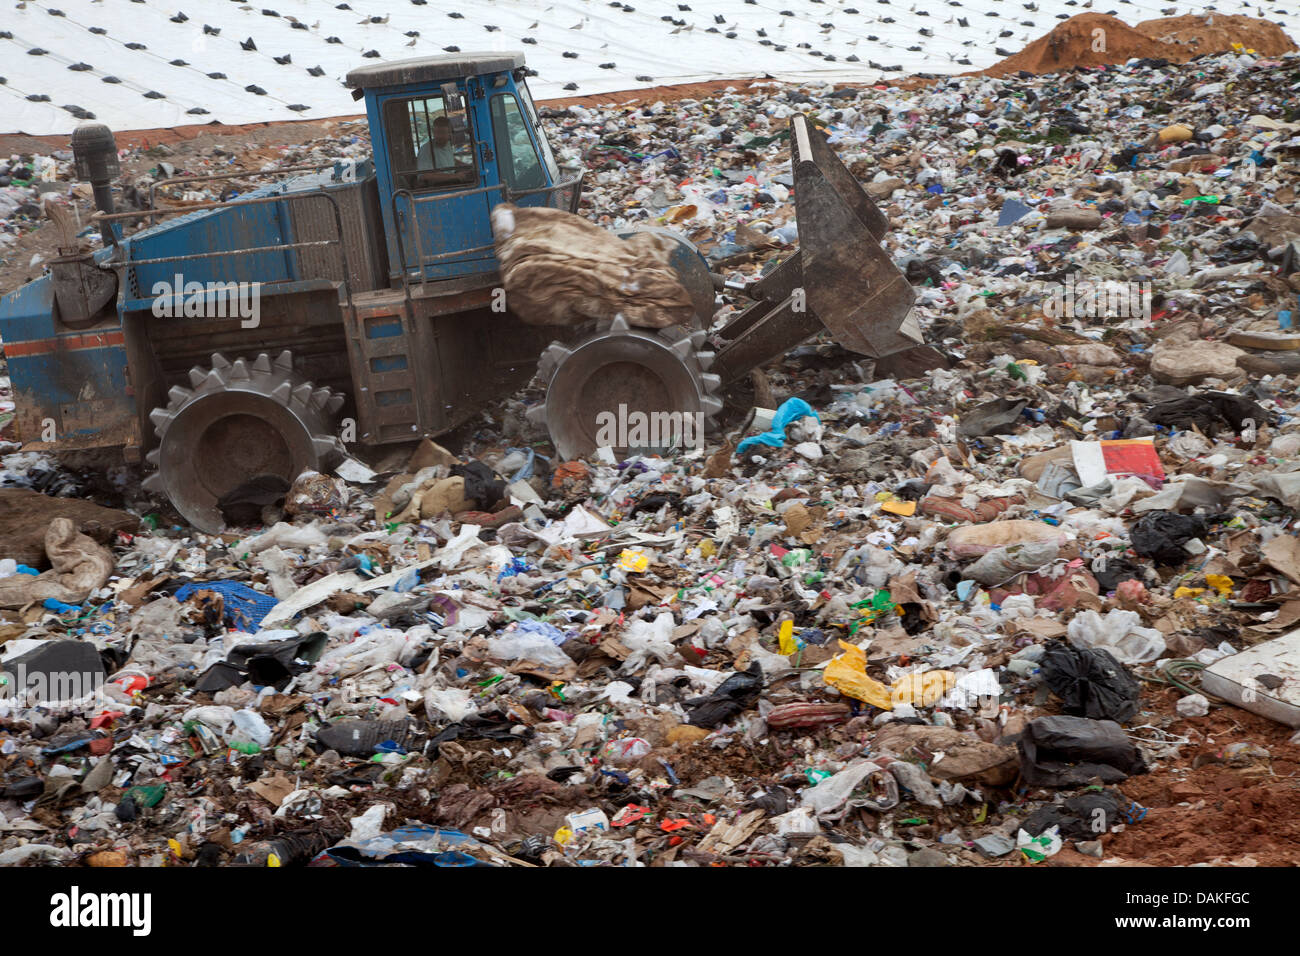 Garbage piles up in landfill site each day while truck covers it with sand for sanitary purpose Stock Photo